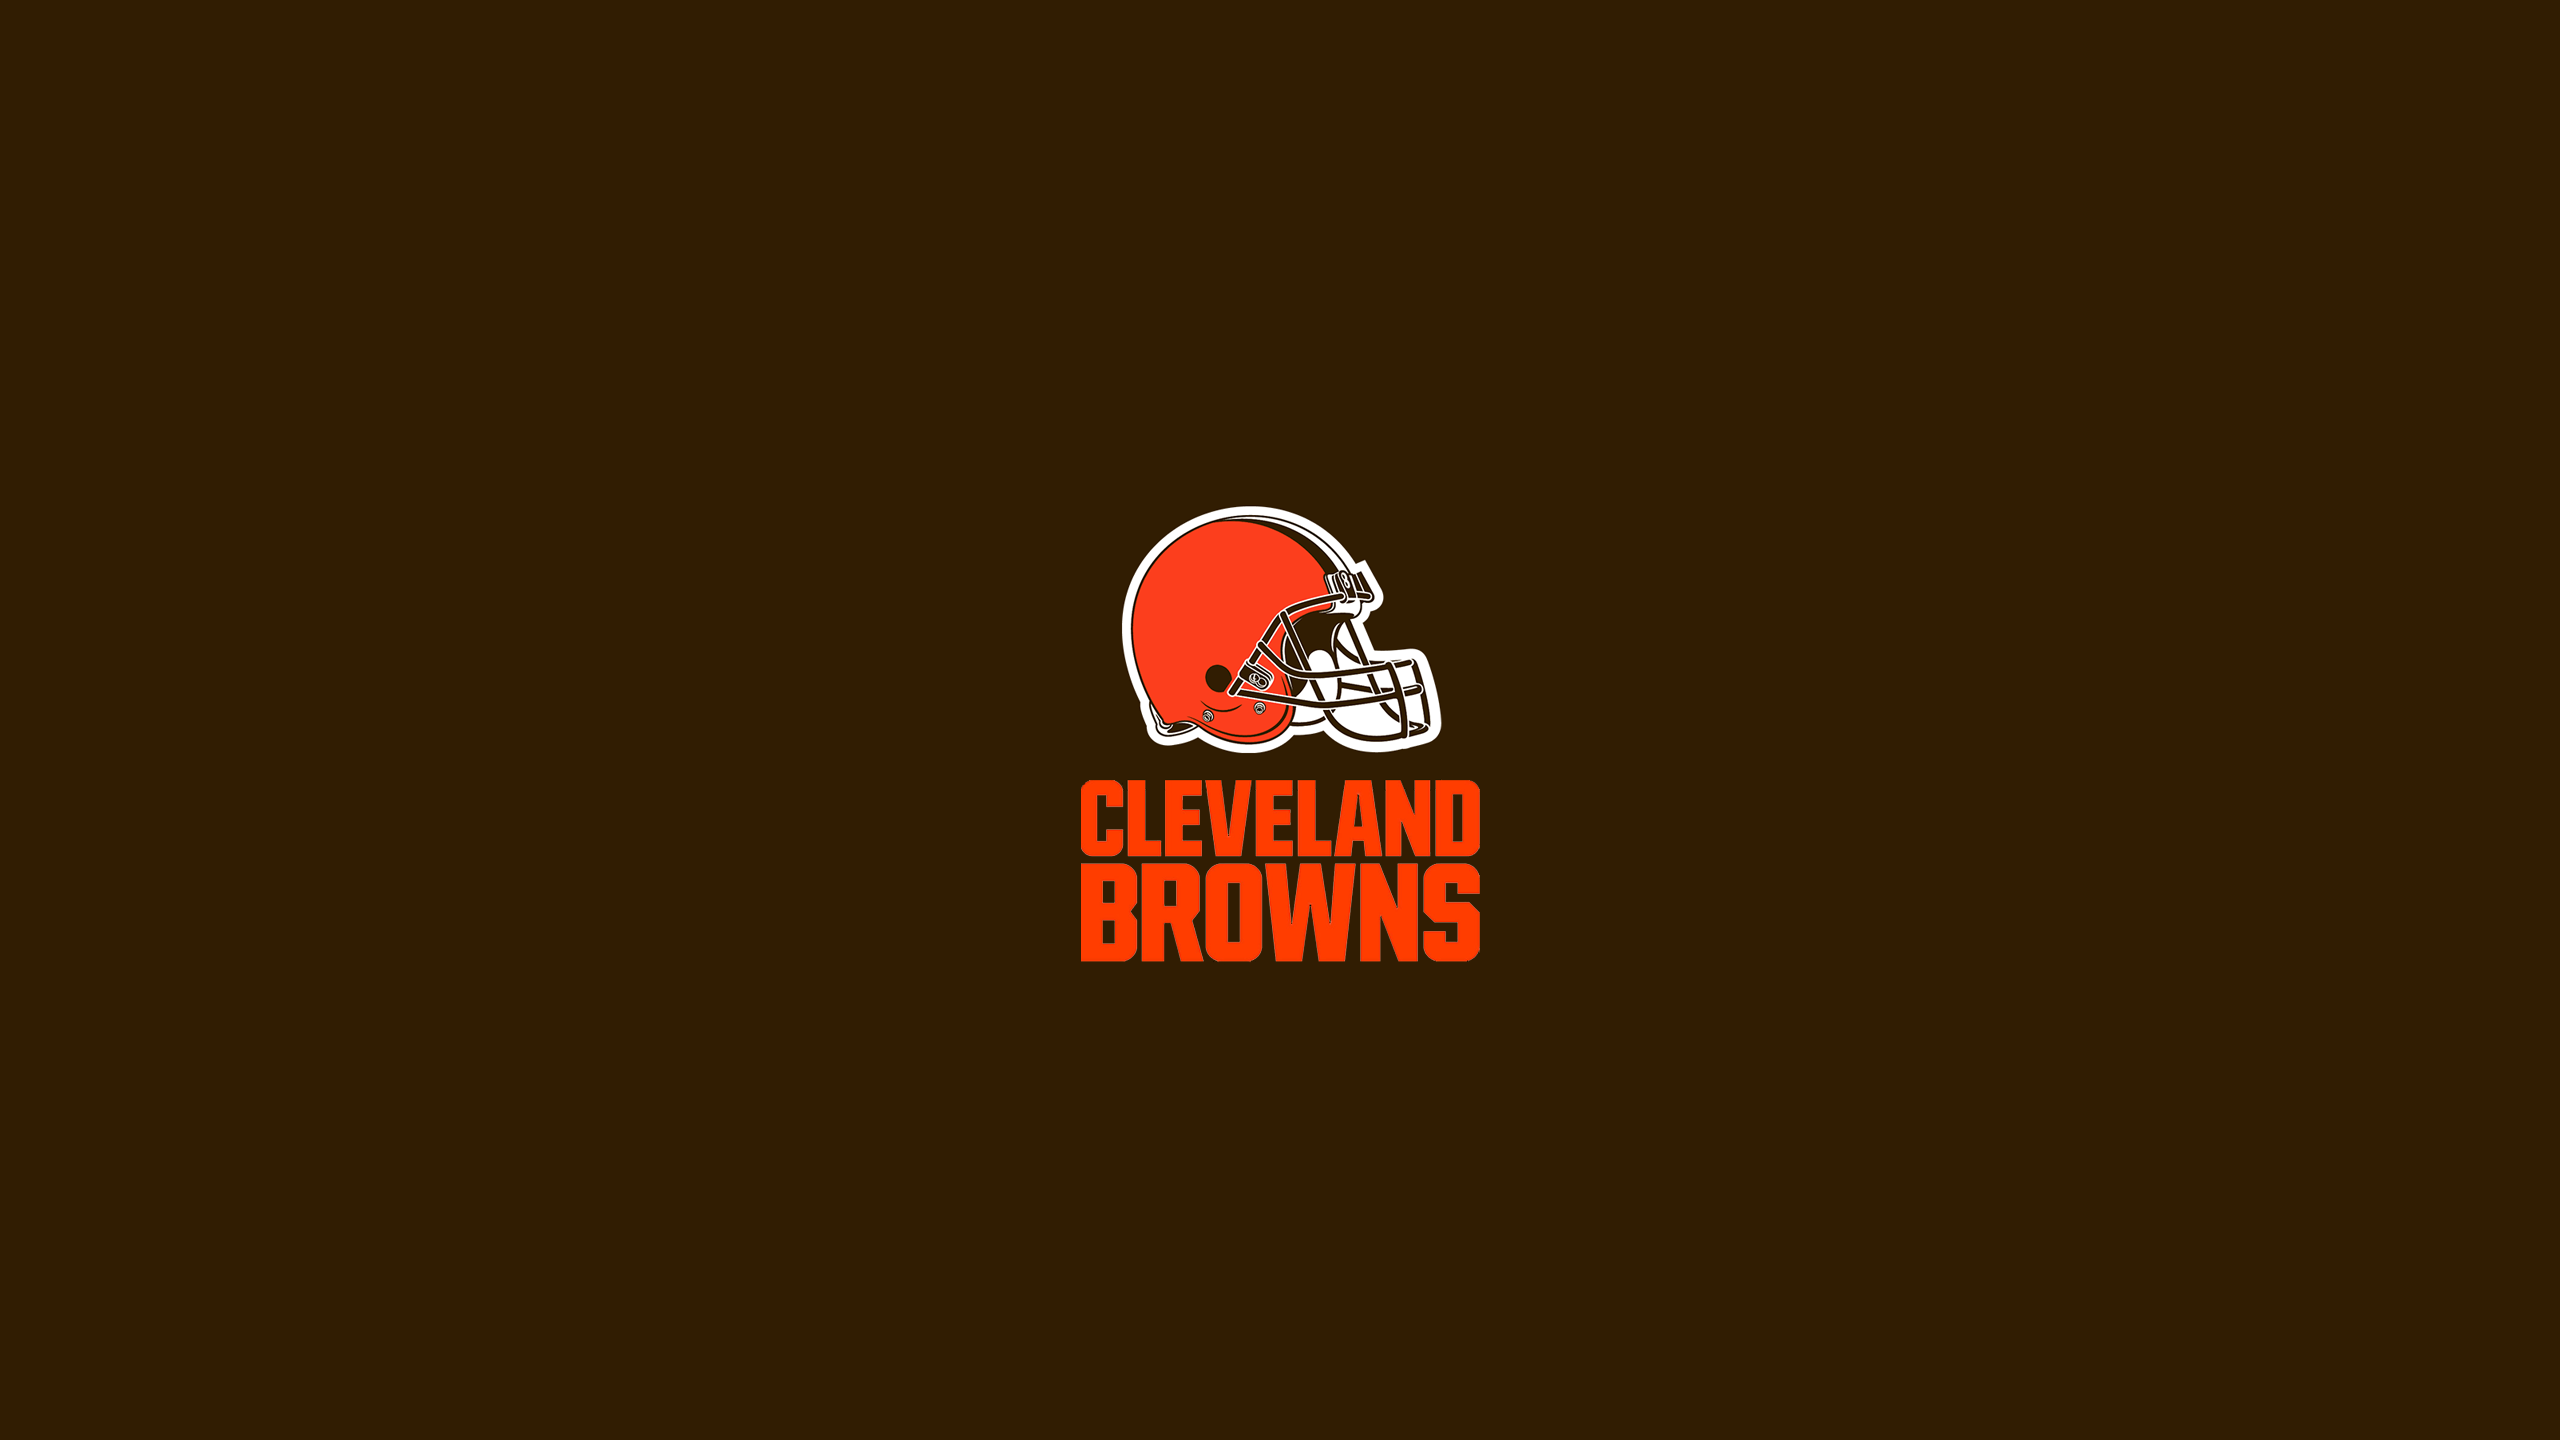 Cleveland Browns - NFL - Square Bettor